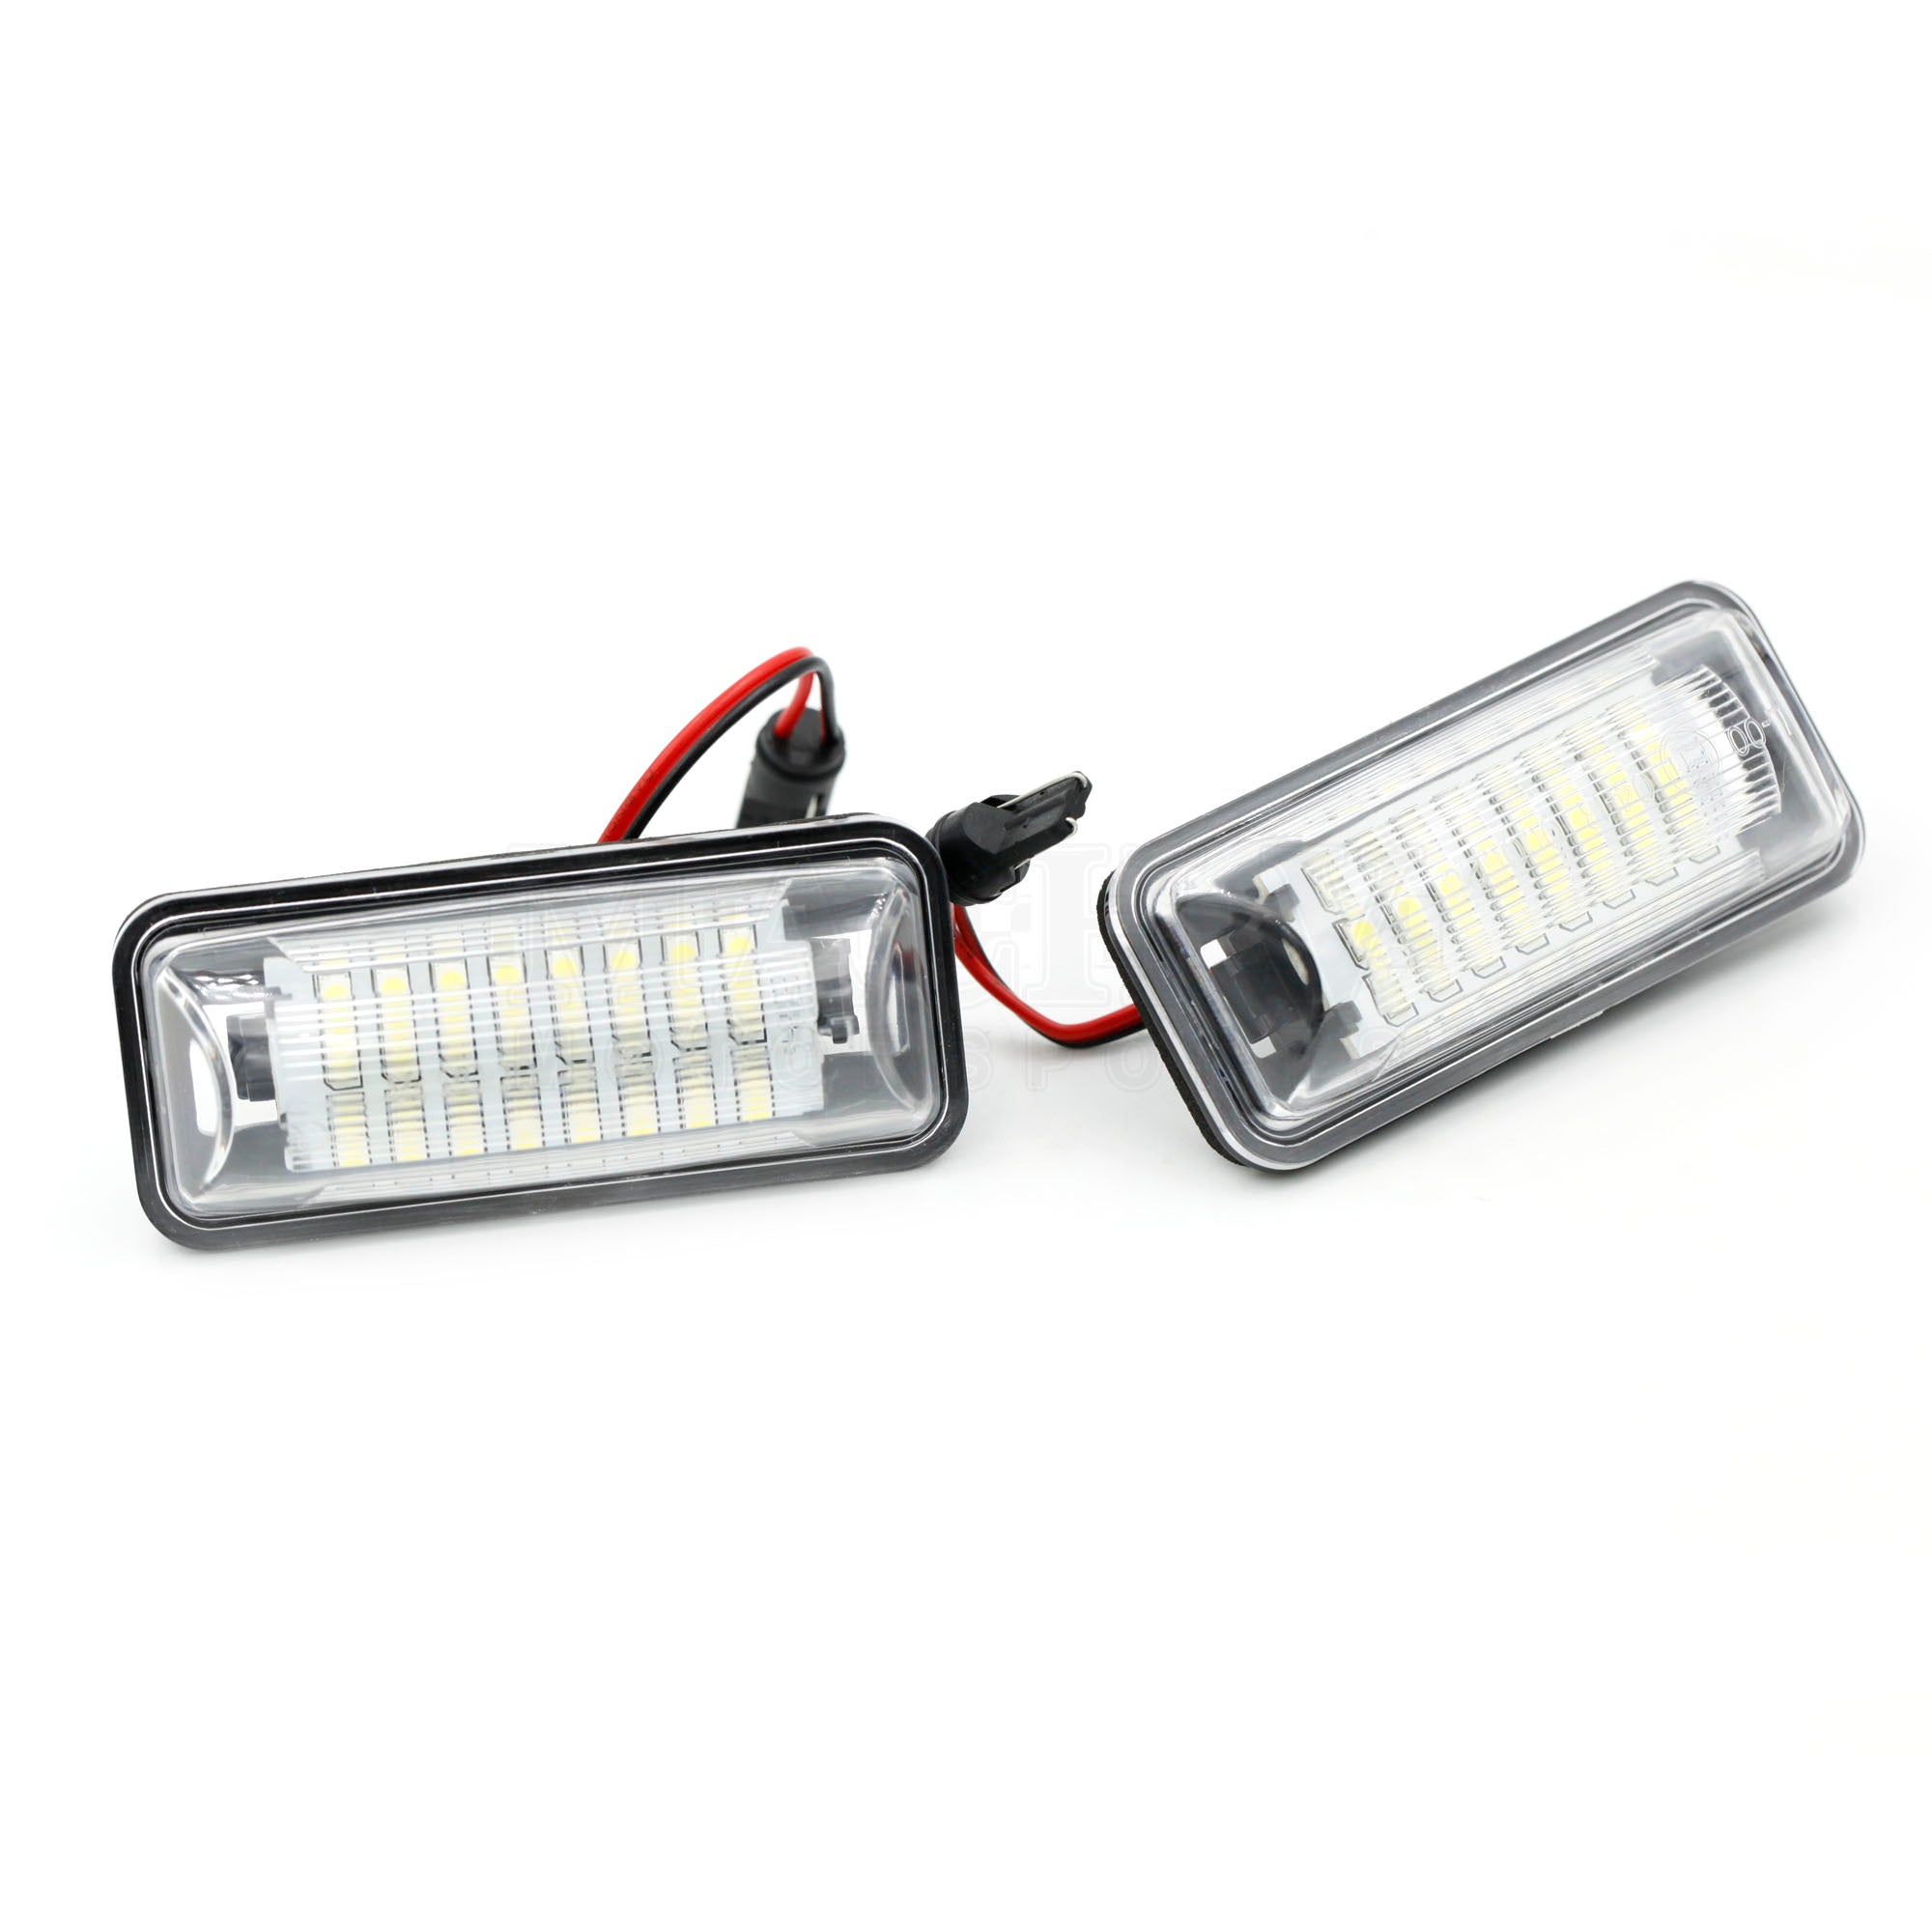 Full Replacement LED License Plate Lamps 2008-2021 WRX/STI, 2013-2021 